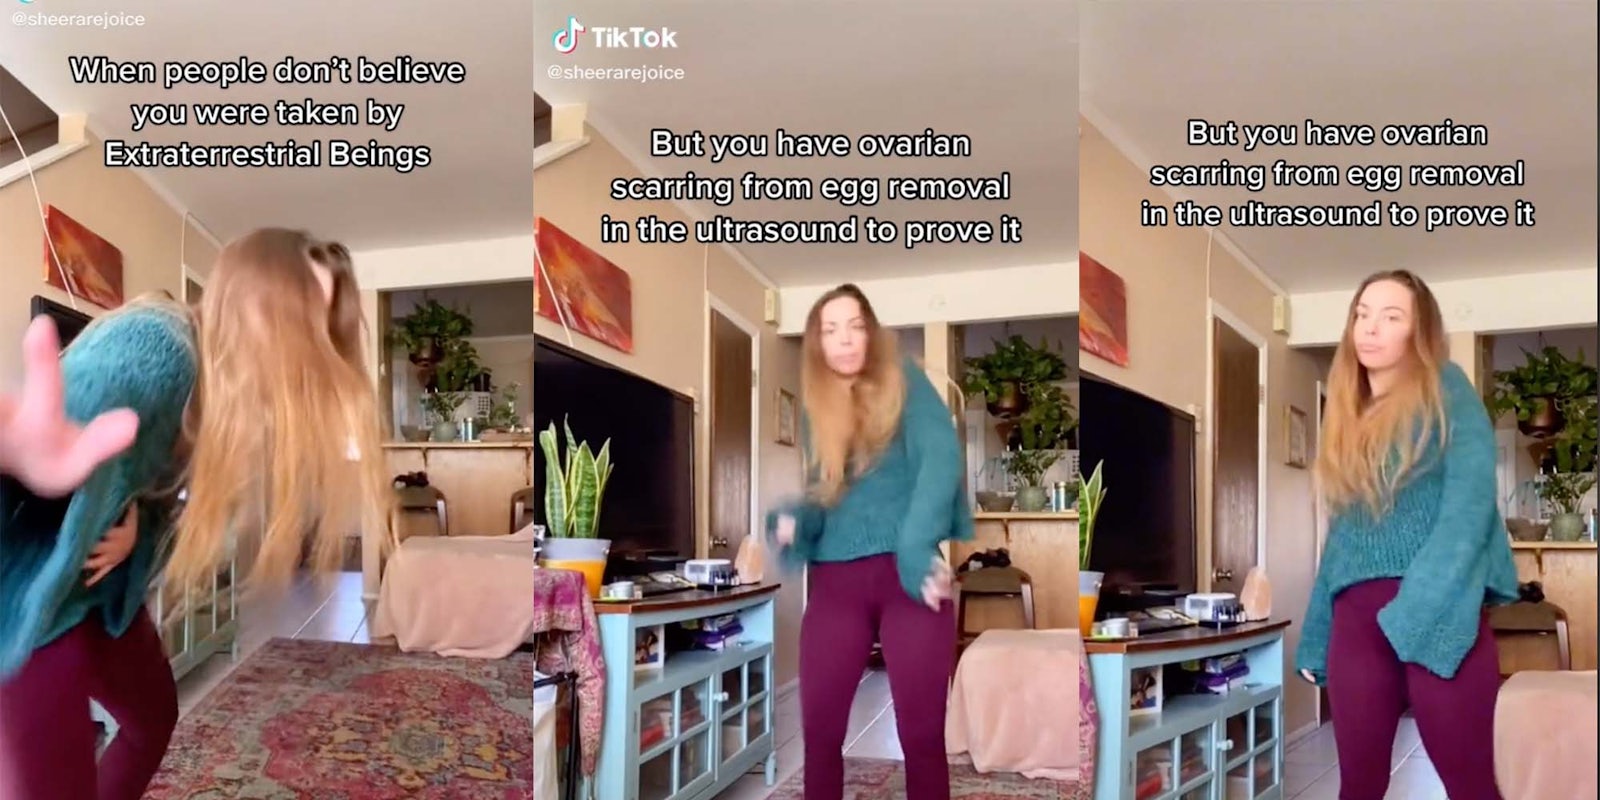 A woman on TikTok says she was abducted by alien and that they took her eggs.